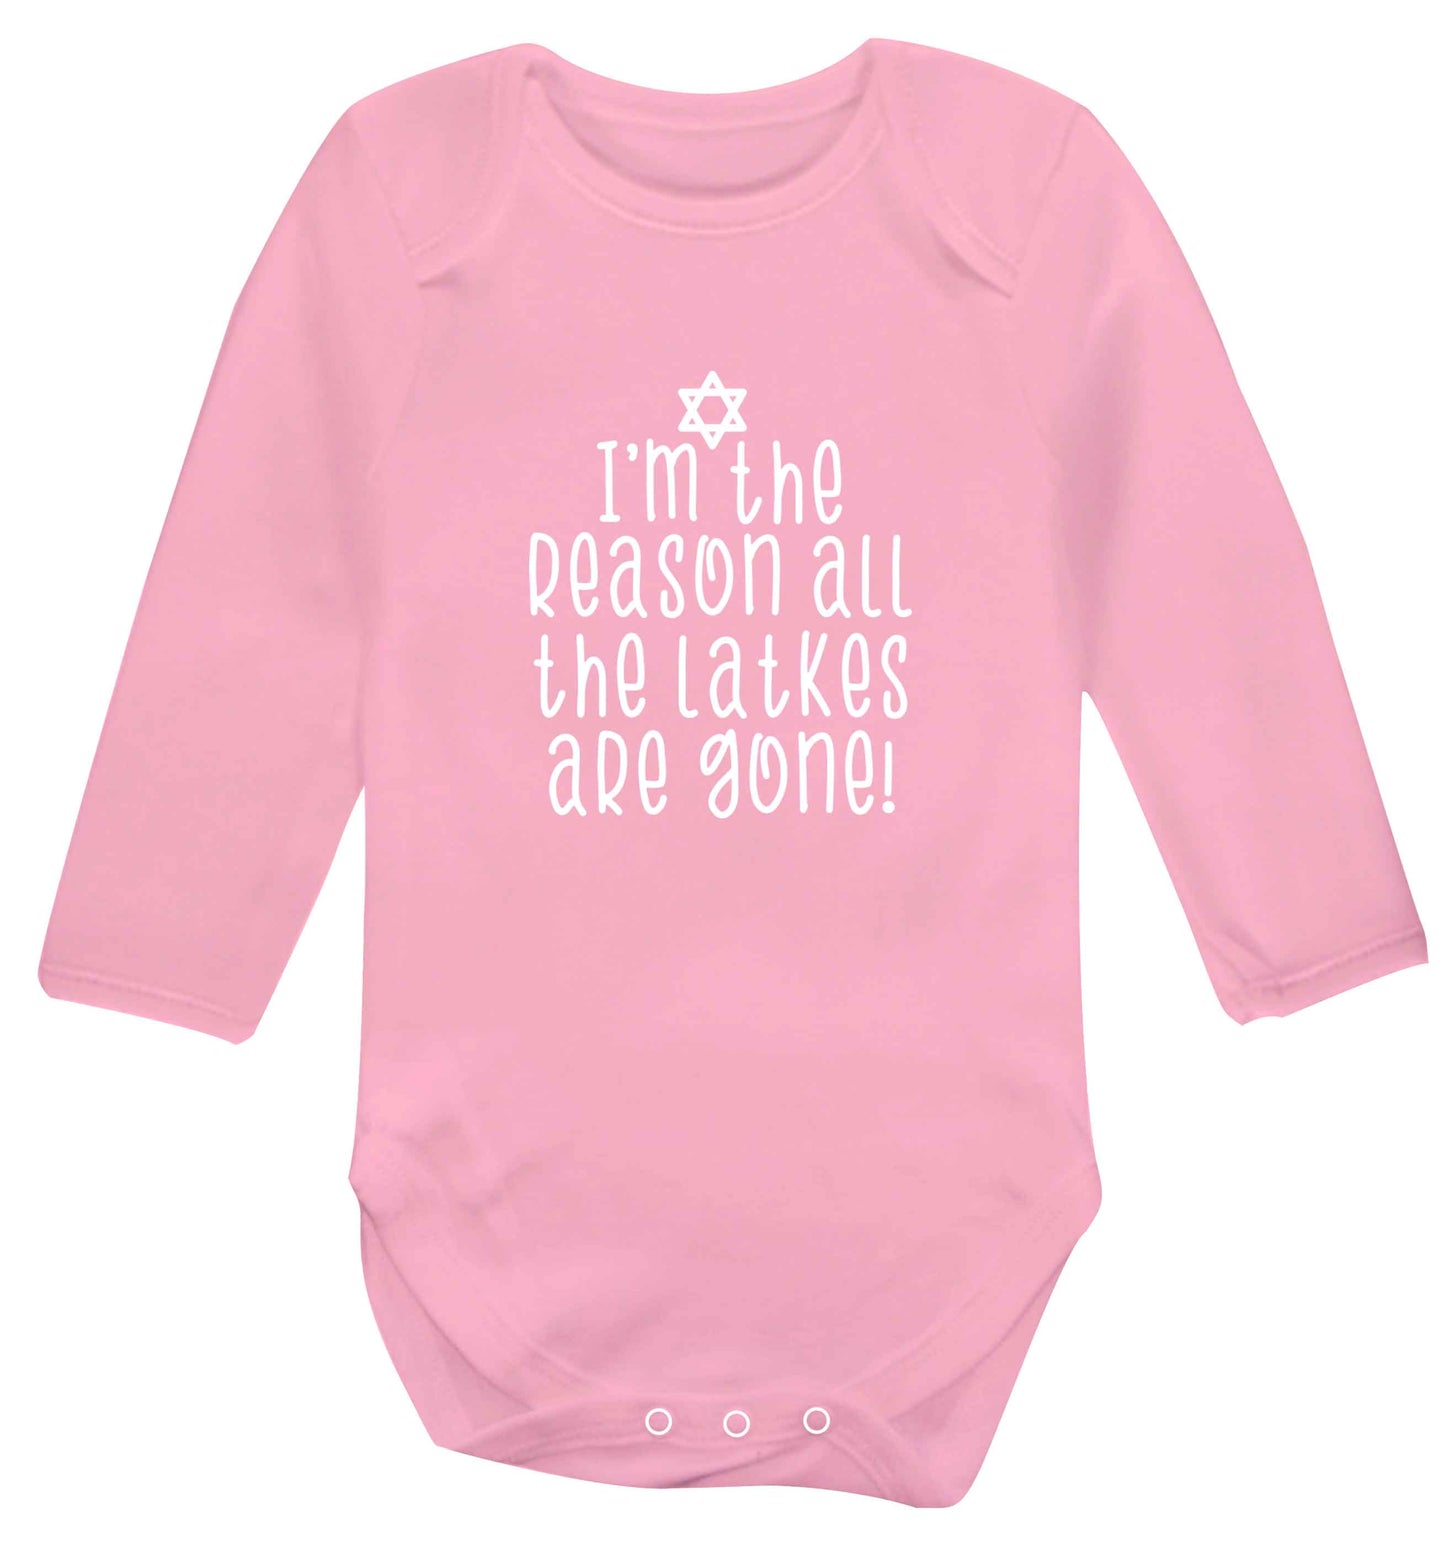 I'm the reason all the latkes are gone baby vest long sleeved pale pink 6-12 months